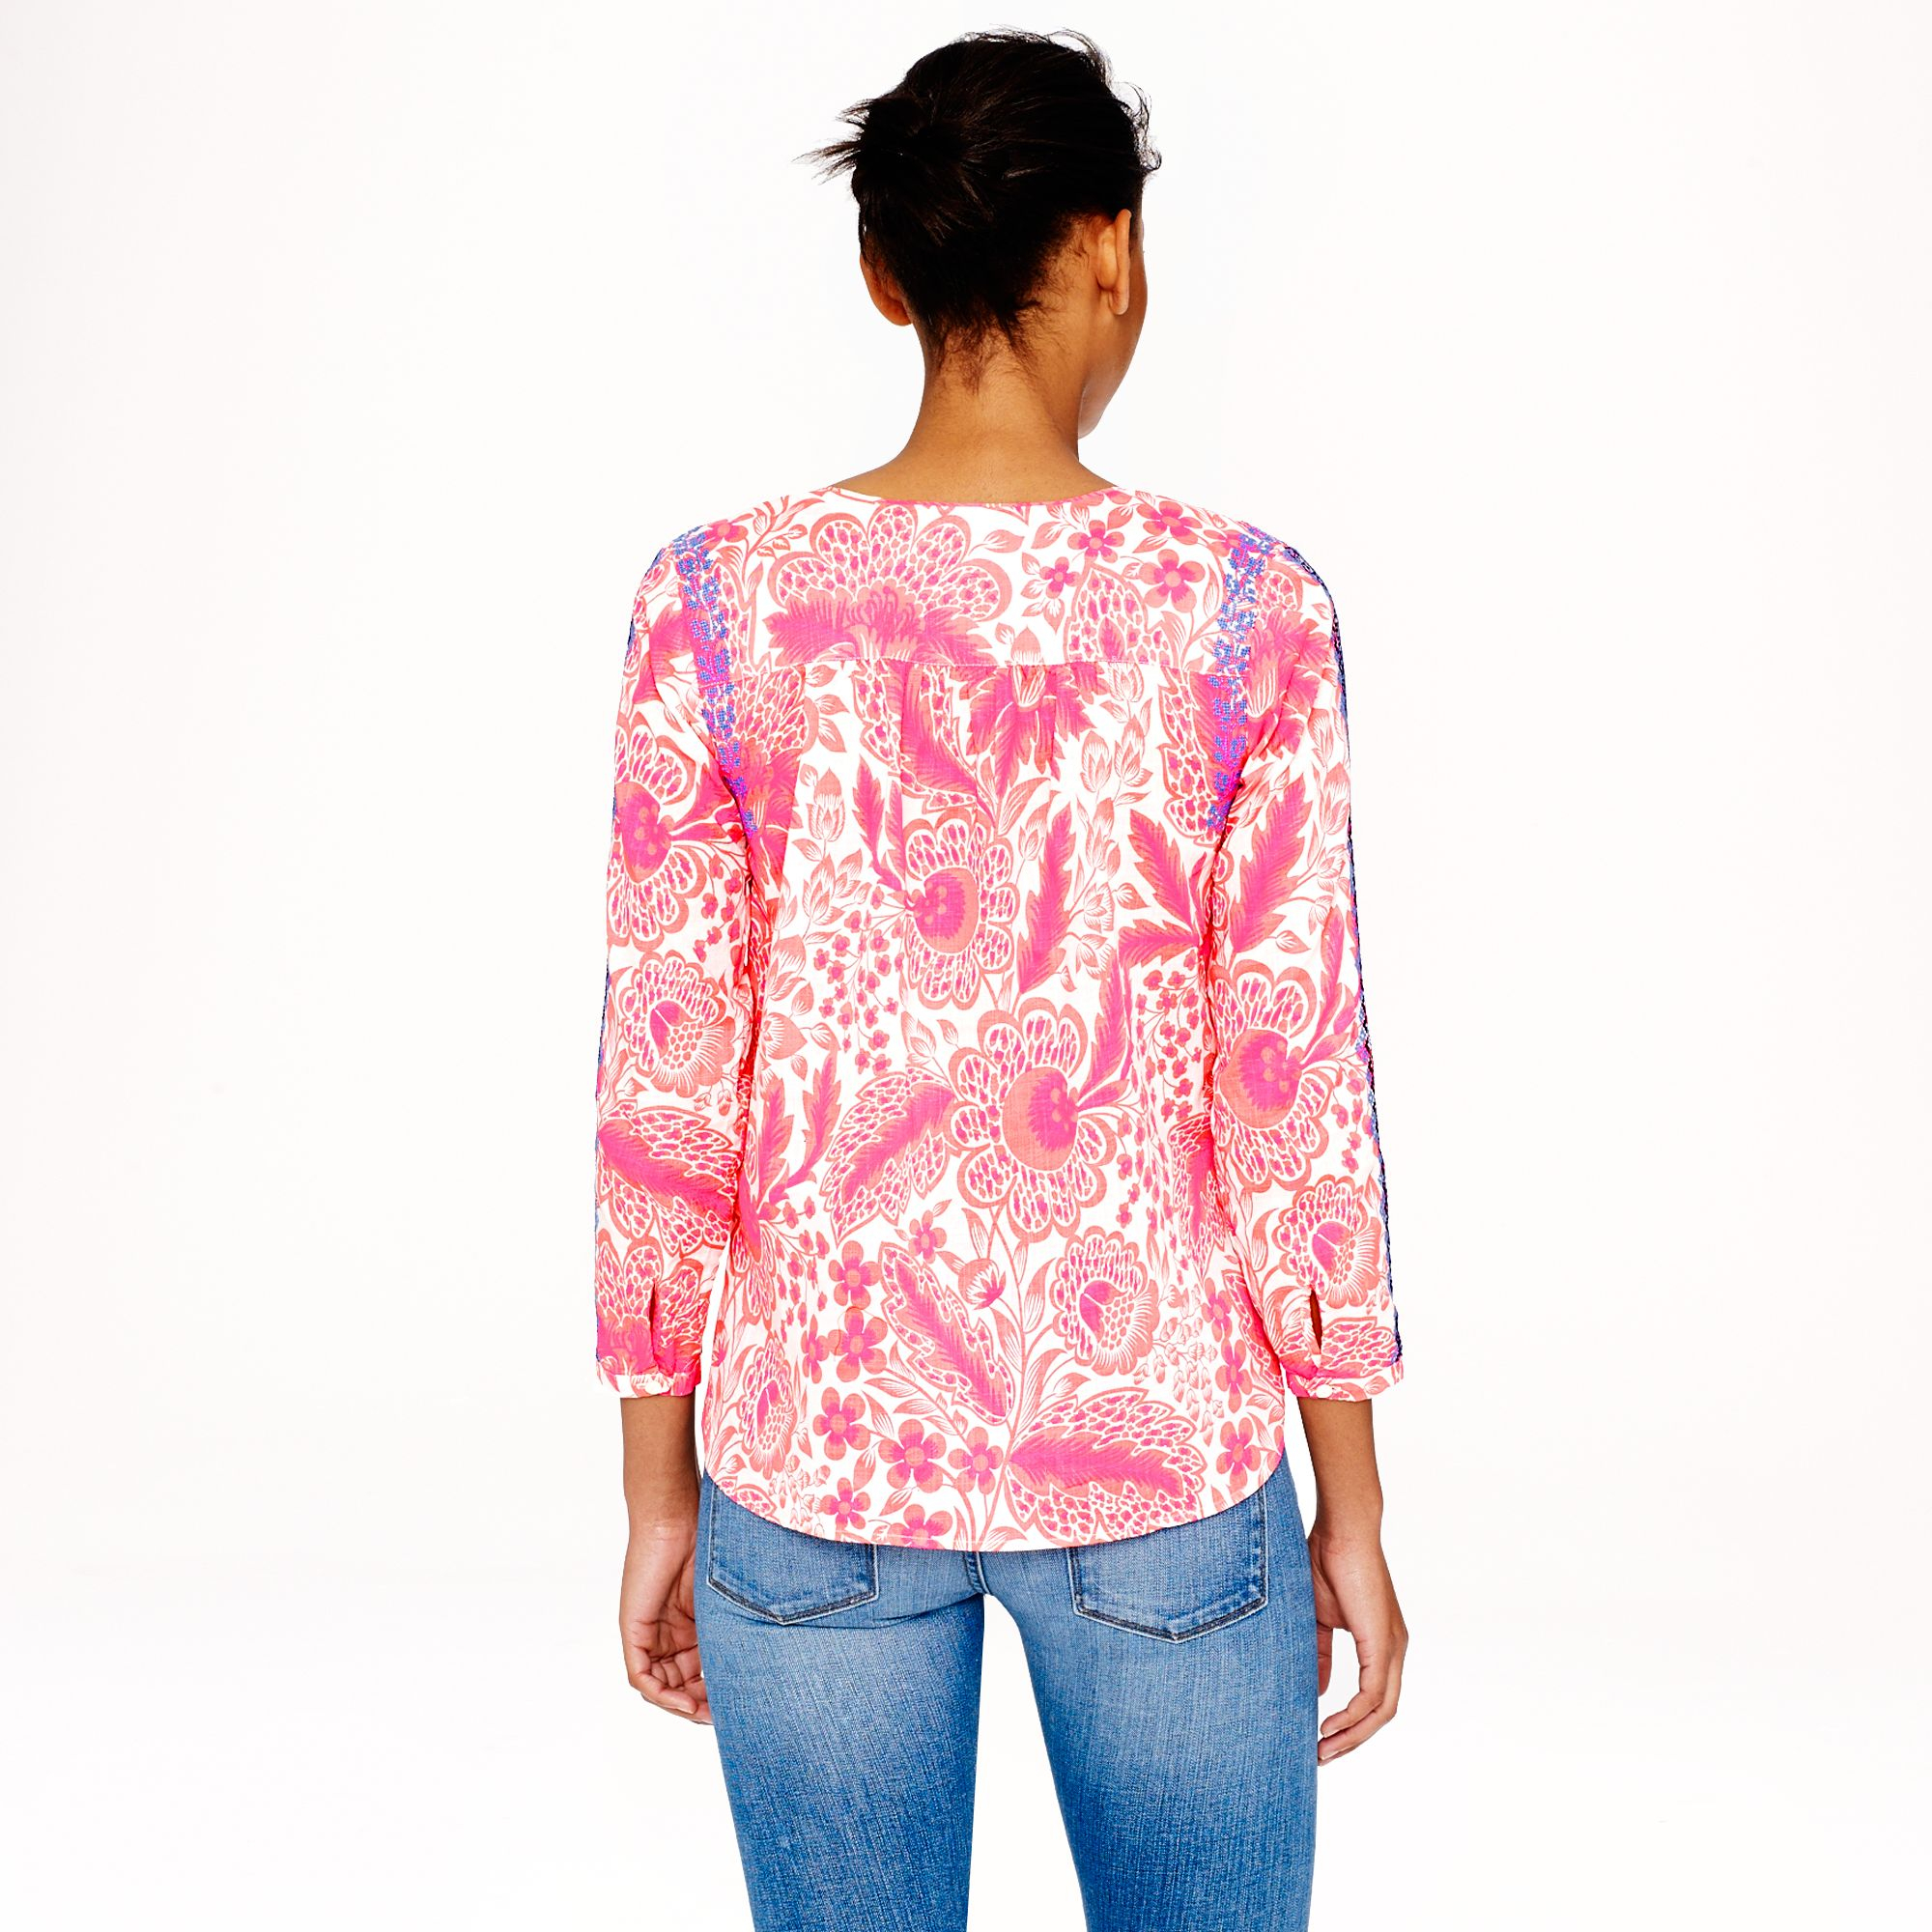 J. Crew coral pink embroidered floral peasant top, white cutoff